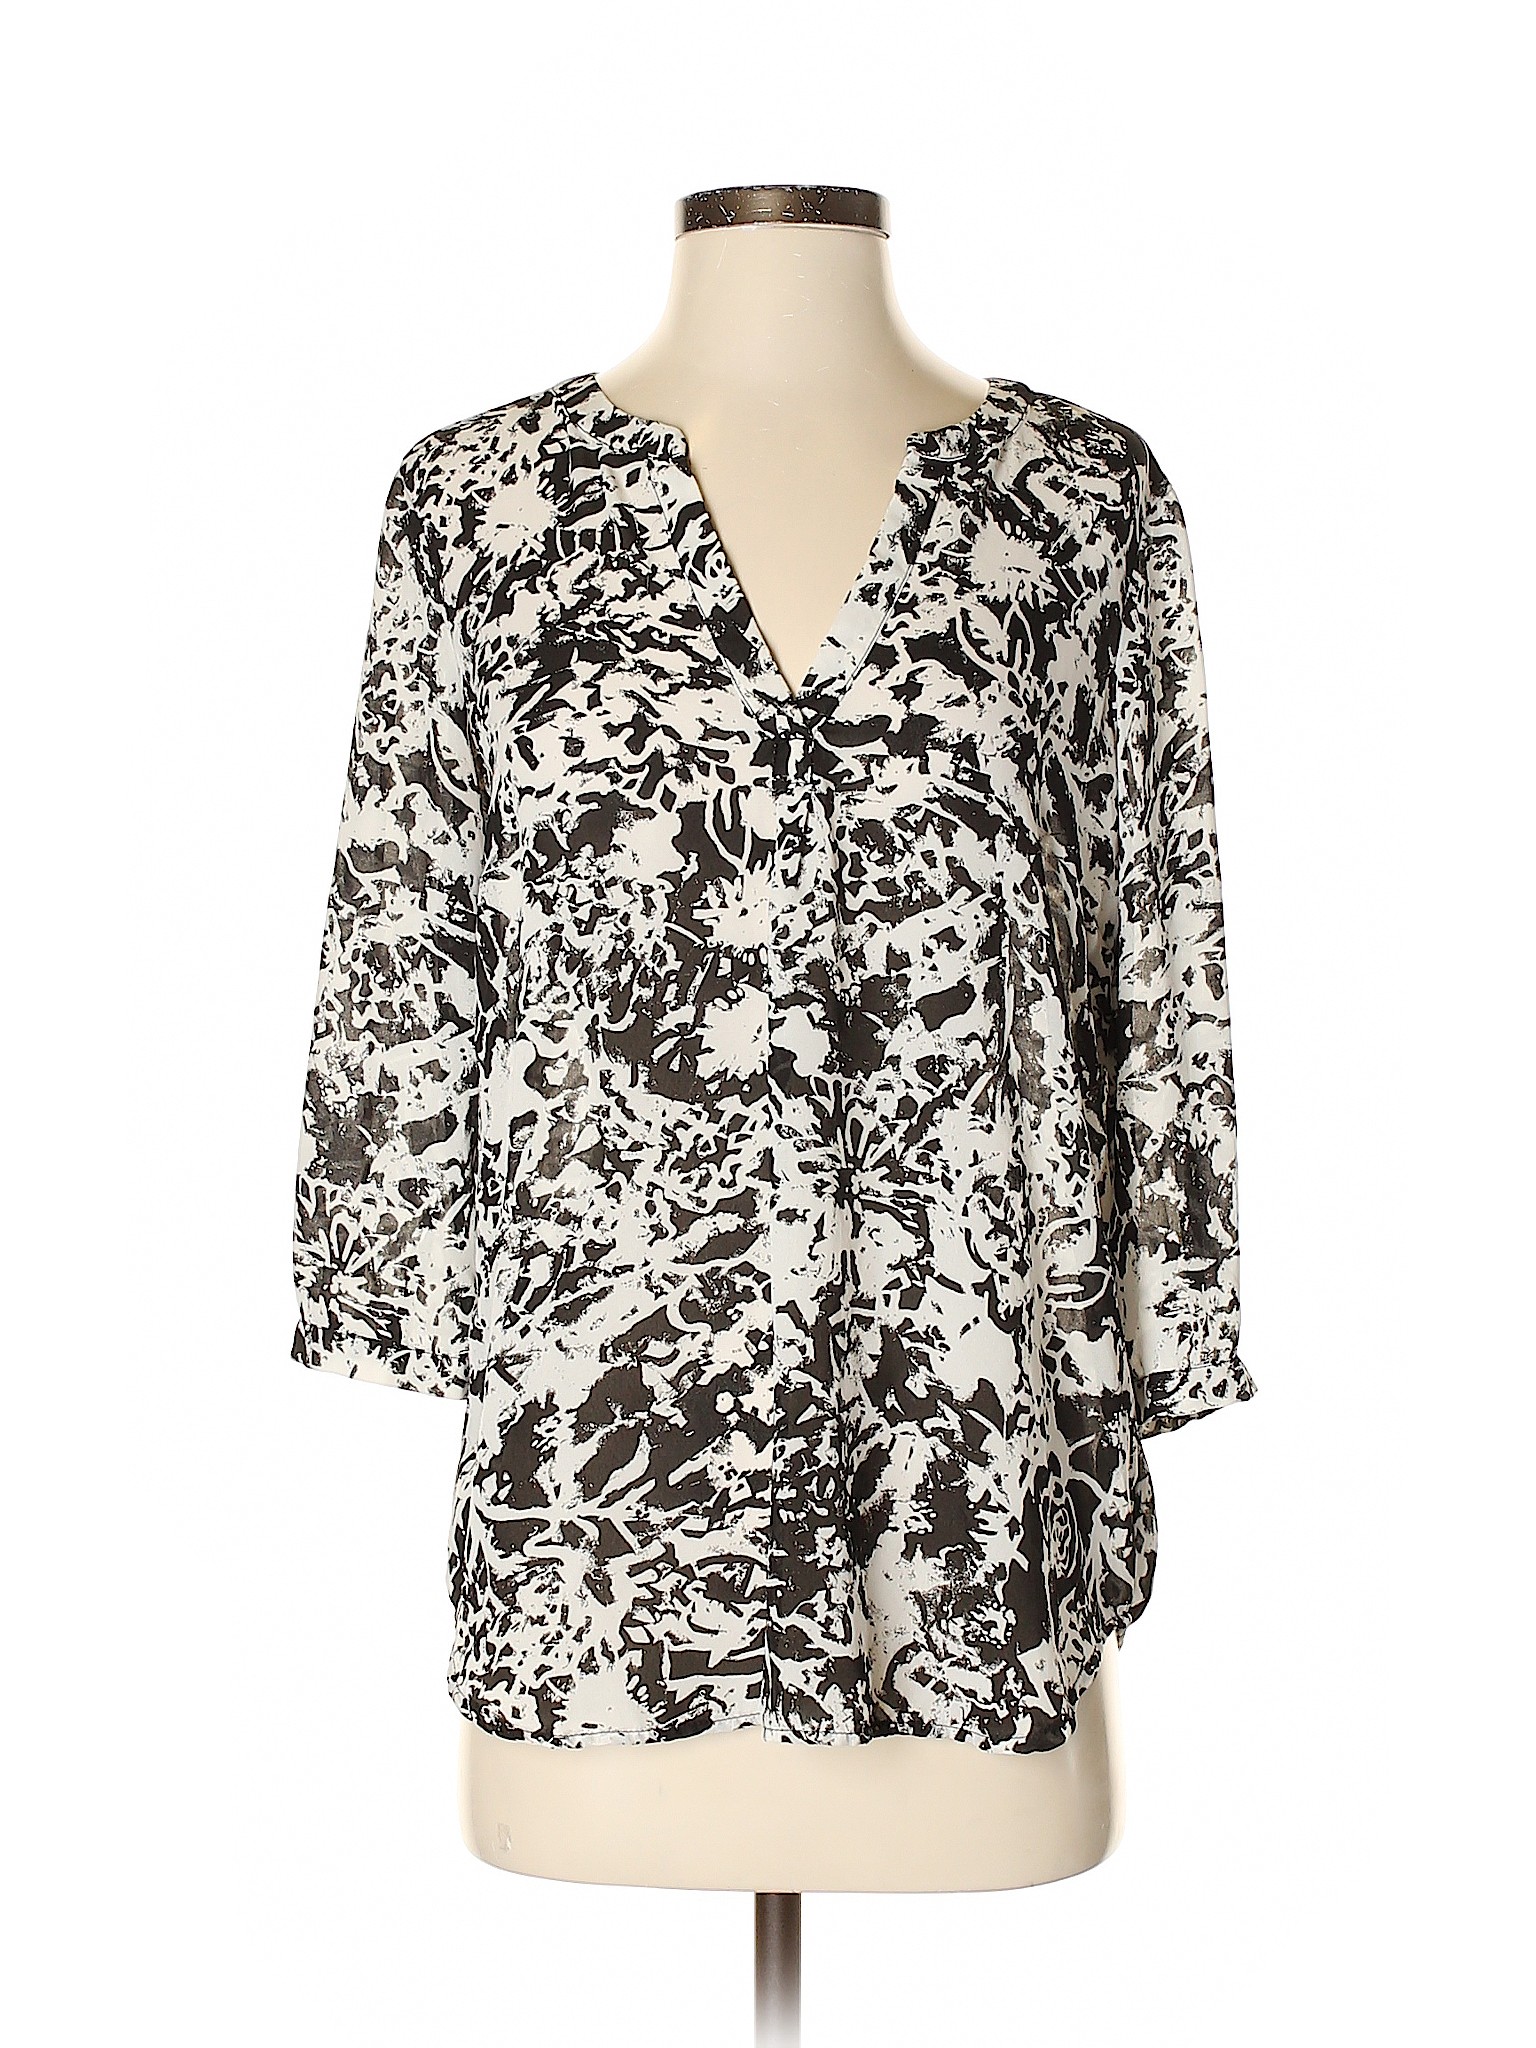 cynthia rowley for marshalls Women's Tops On Sale Up To 90% Off Retail ...